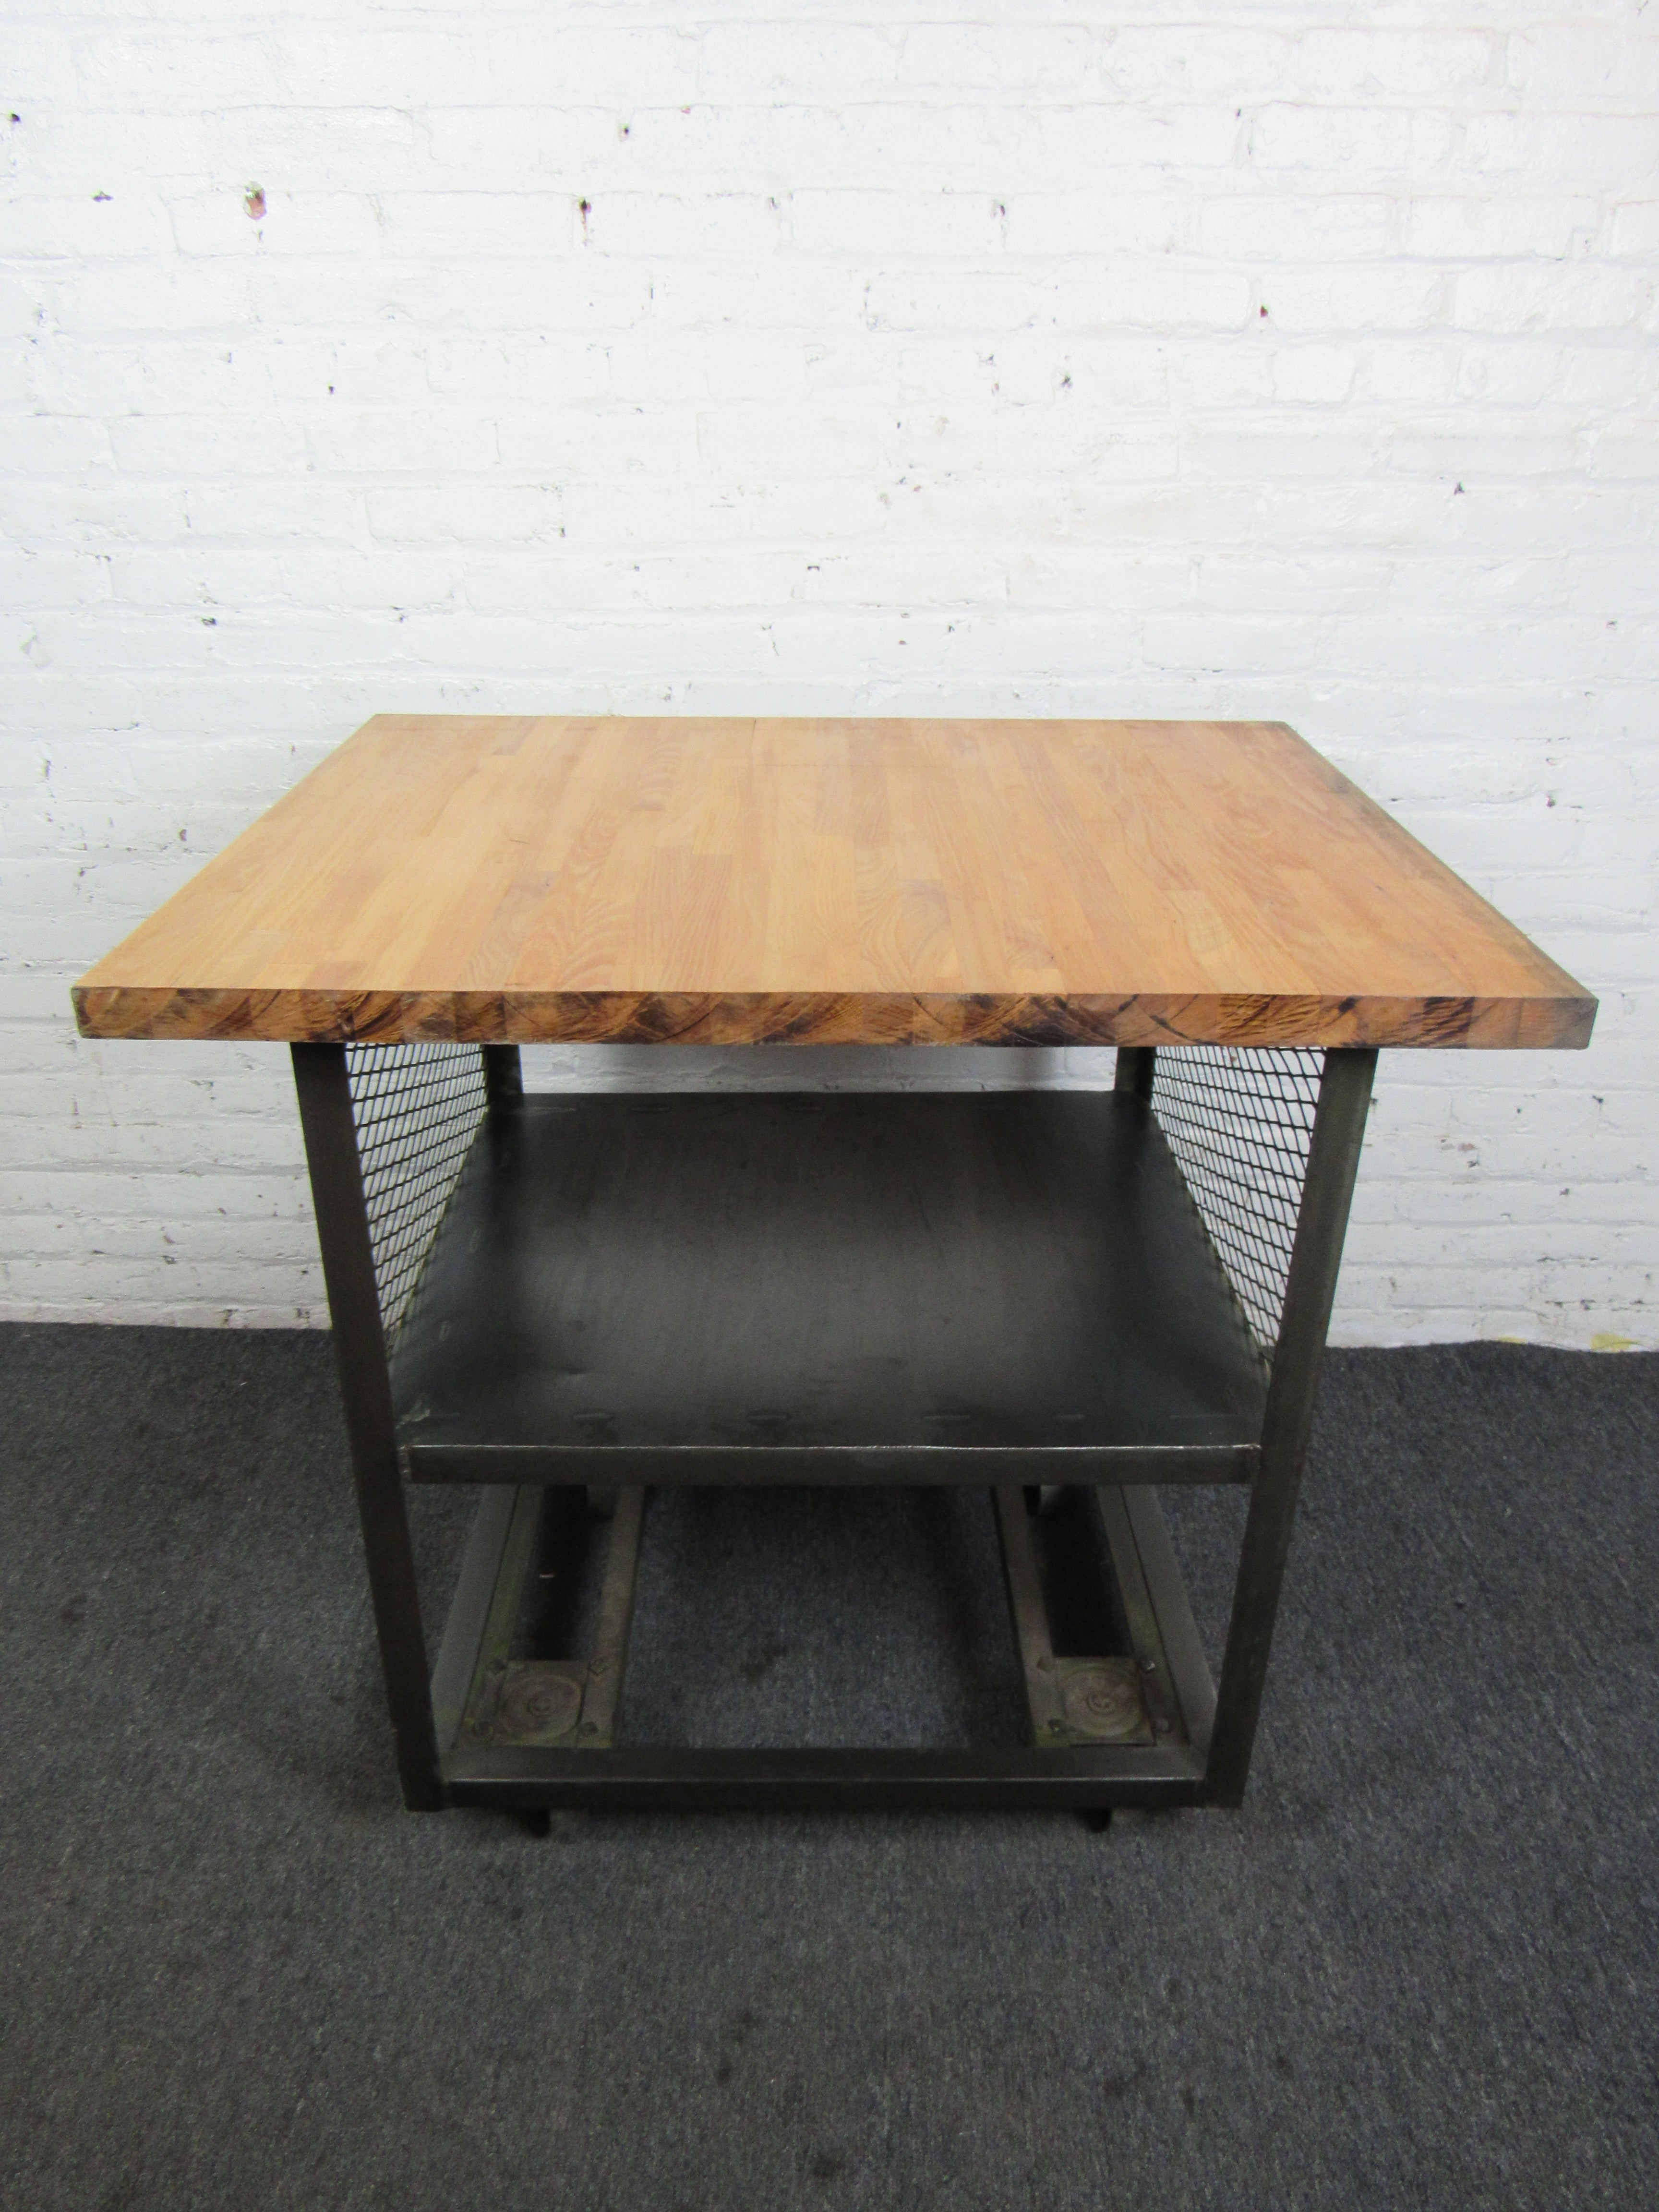 This functional and sturdy industrial style cart features a shelf for storage as well as a butcher block surface. Perfect for a kitchen, workspace, or other uses. Please confirm item location with seller (NY/NJ).
 